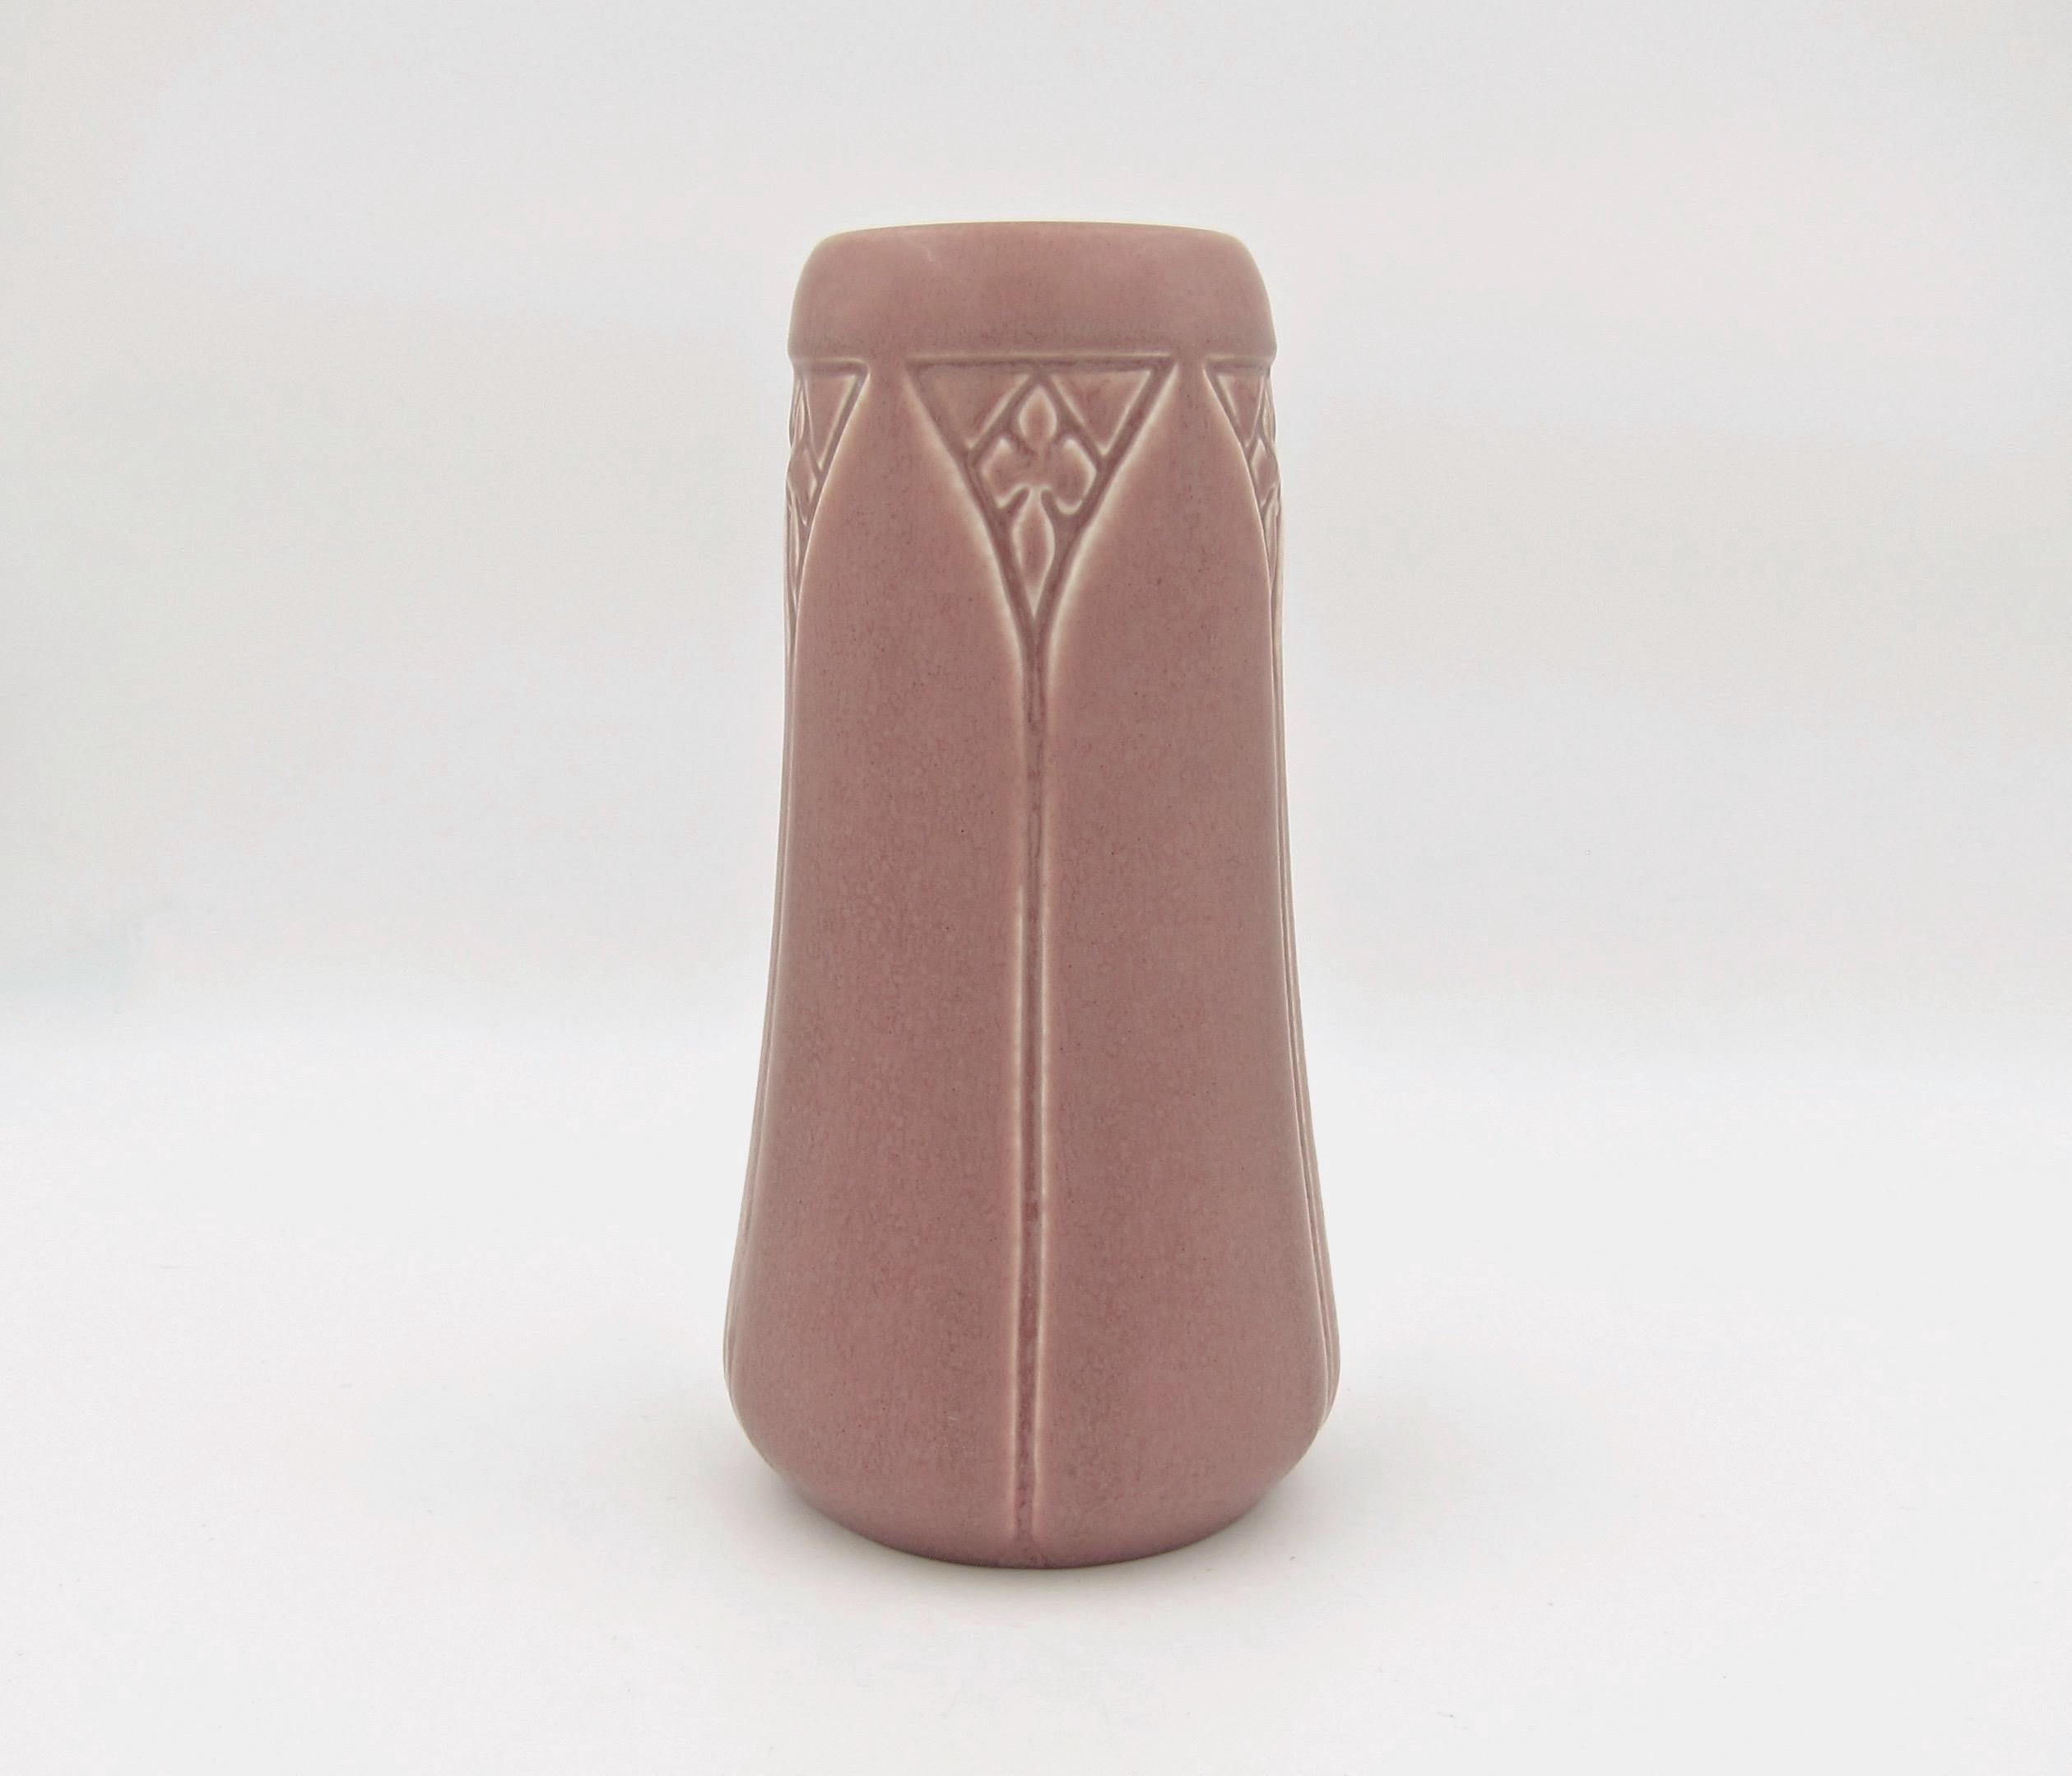 A Rookwood Pottery production vase made during the Arts & Crafts period in 1921. This elegant American vase is decorated with molded lines that meet in pointed arches under the rim; these arches alternate with stylized fleur-de-lys motifs. The